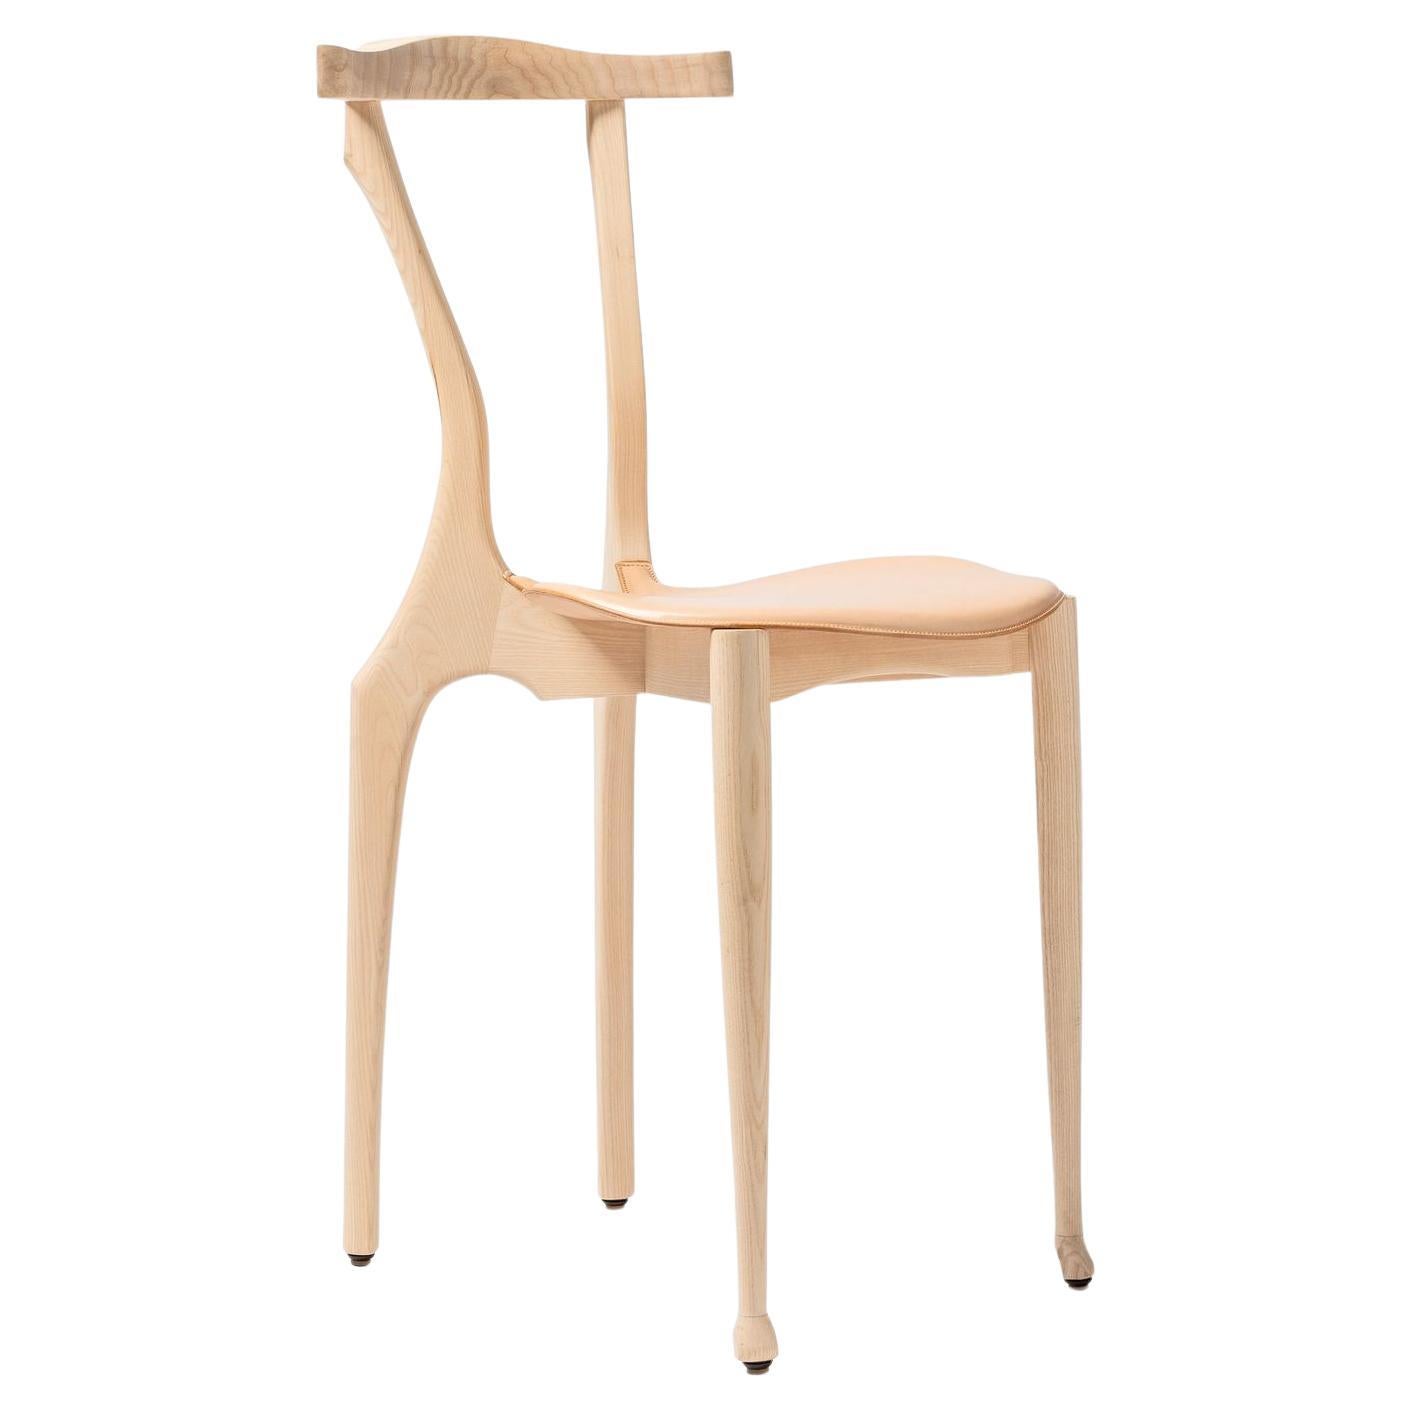 Gaulinetta Natural Chair by Oscar Tusquets For Sale